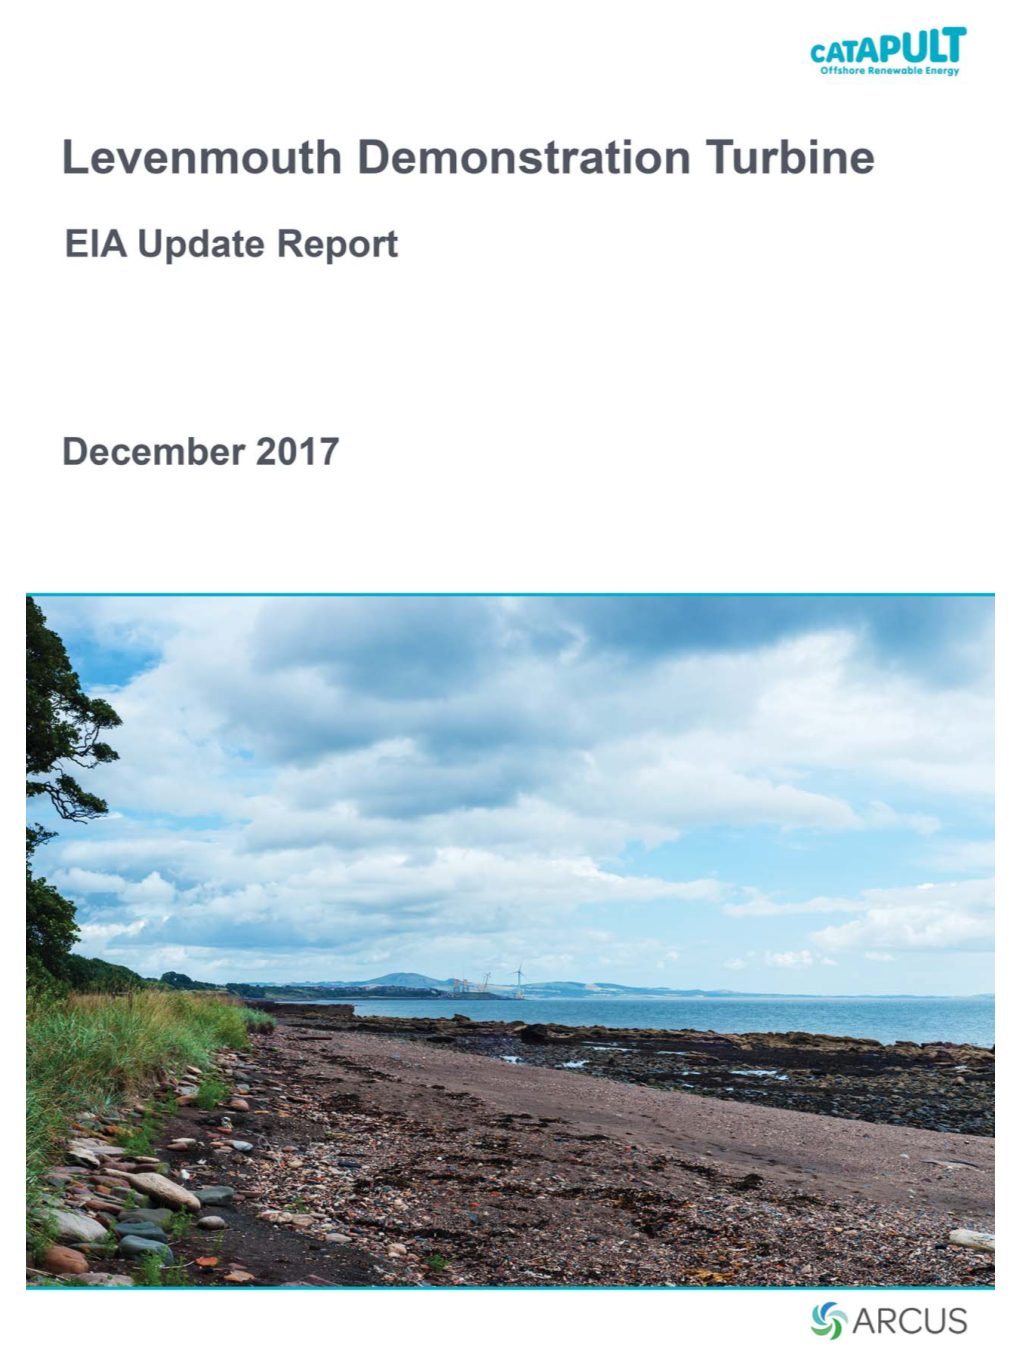 EIA Update Report Levenmouth Demonstration Turbine